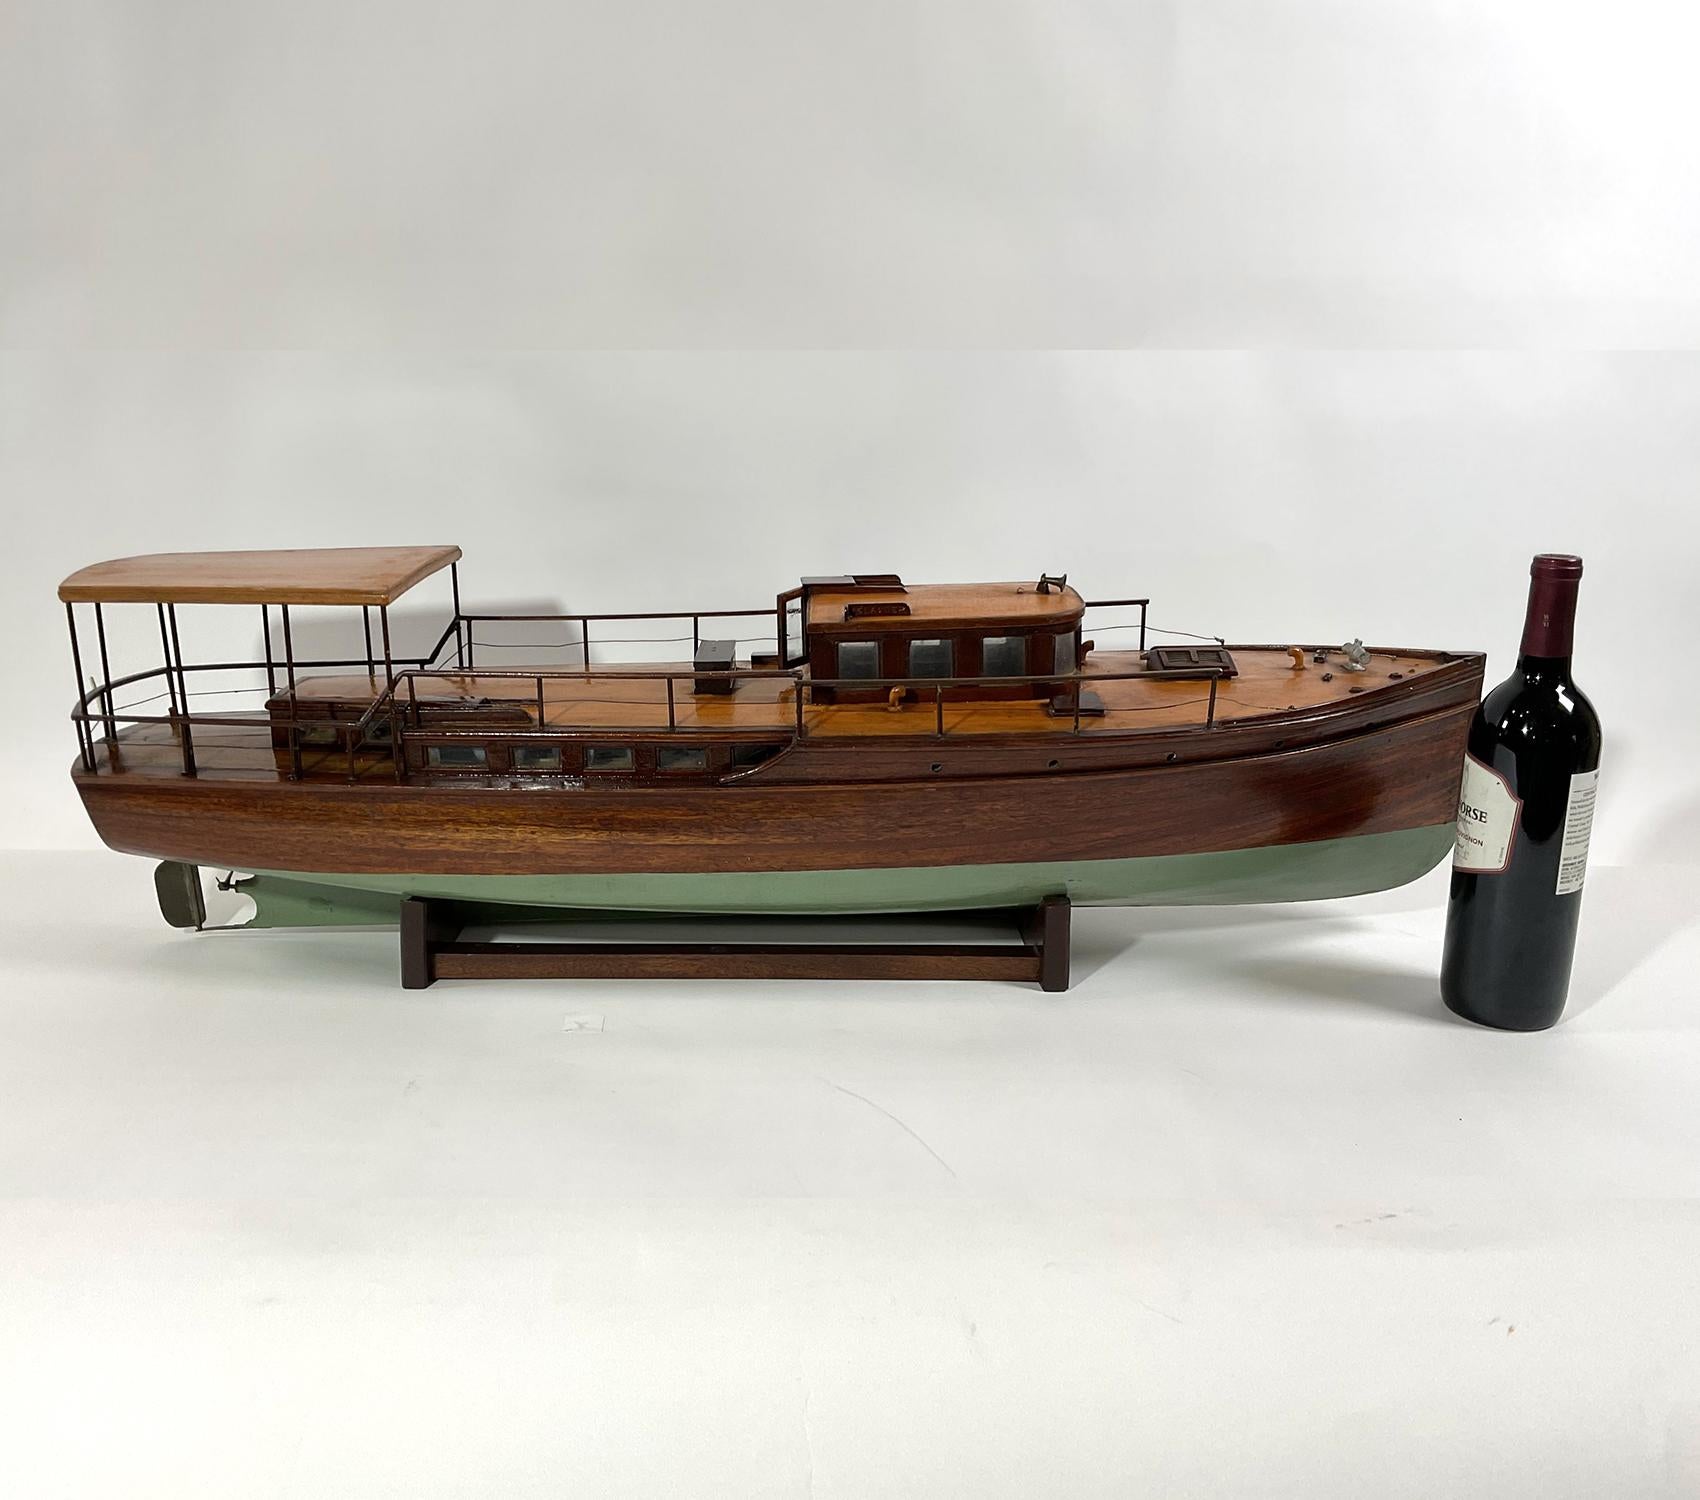 North American Planked Model of the 1920s Boston Yacht Islander For Sale